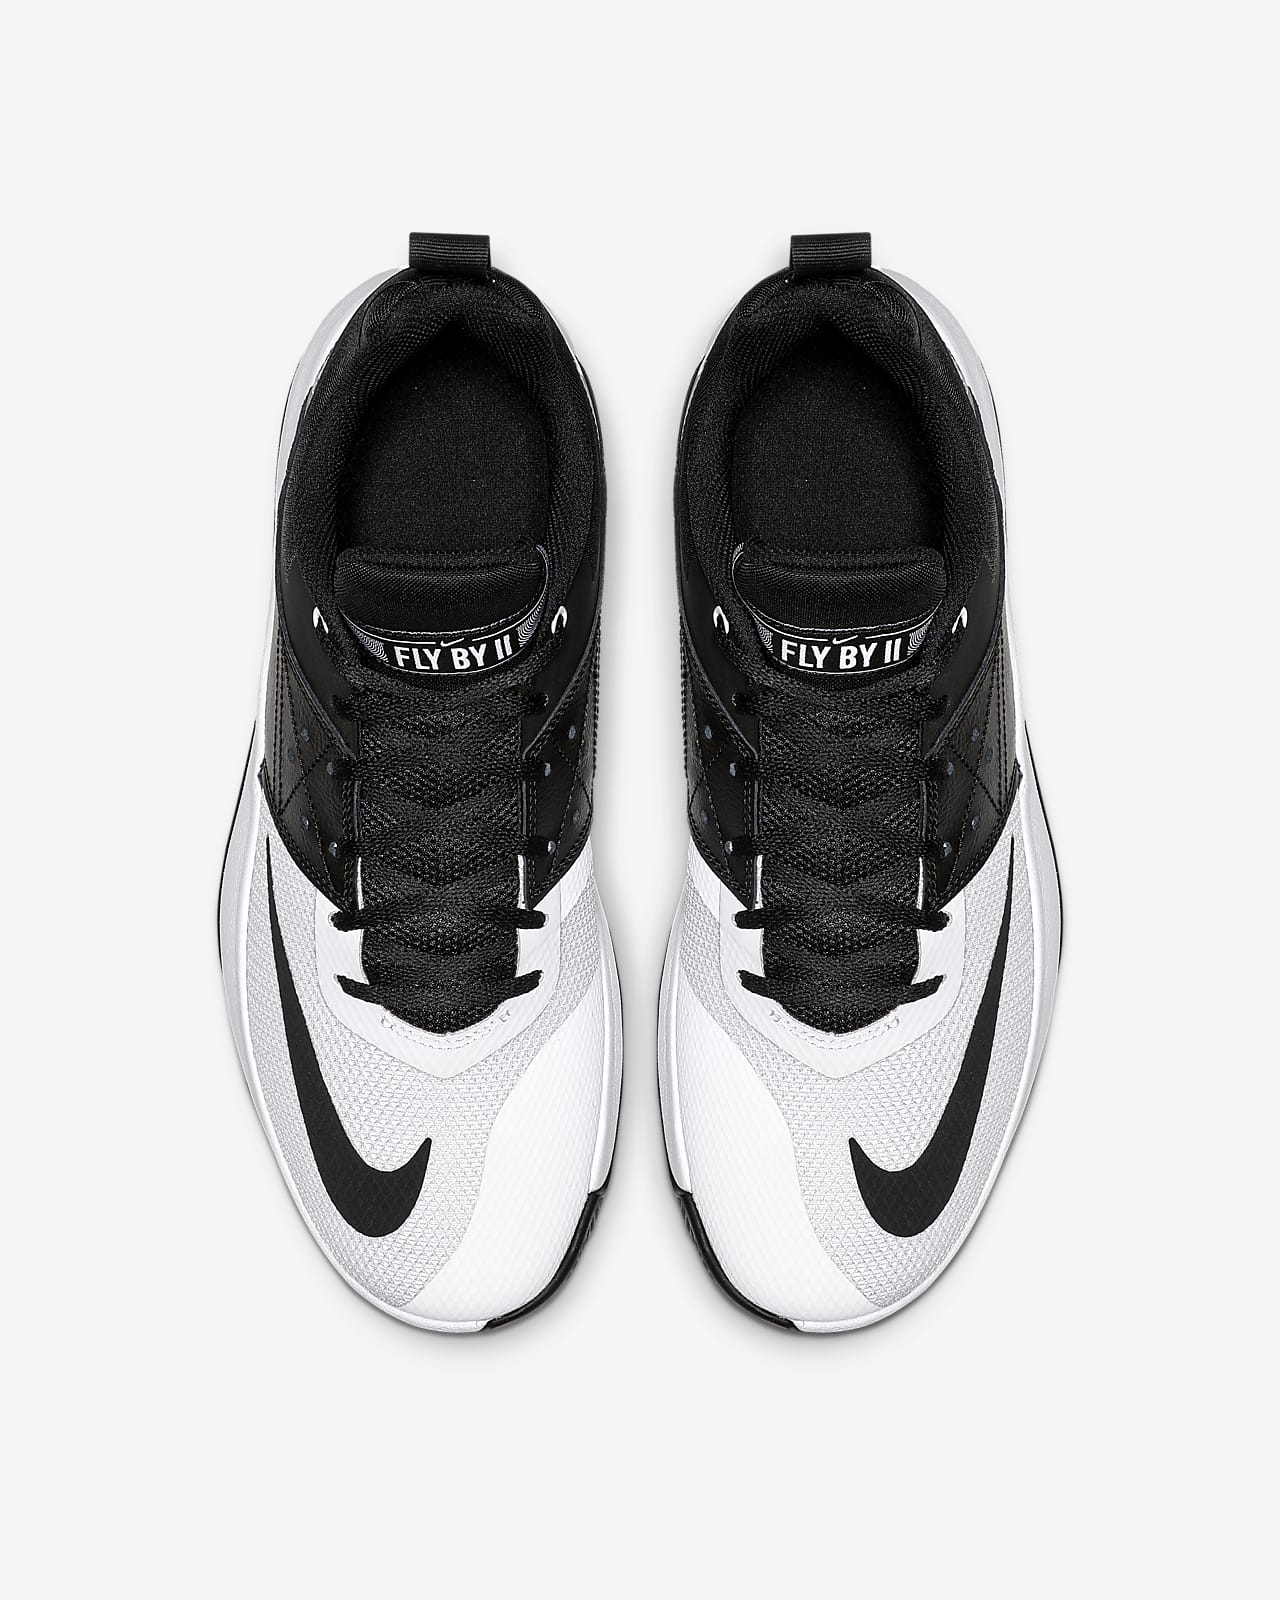 nike flyby low basketball shoes review